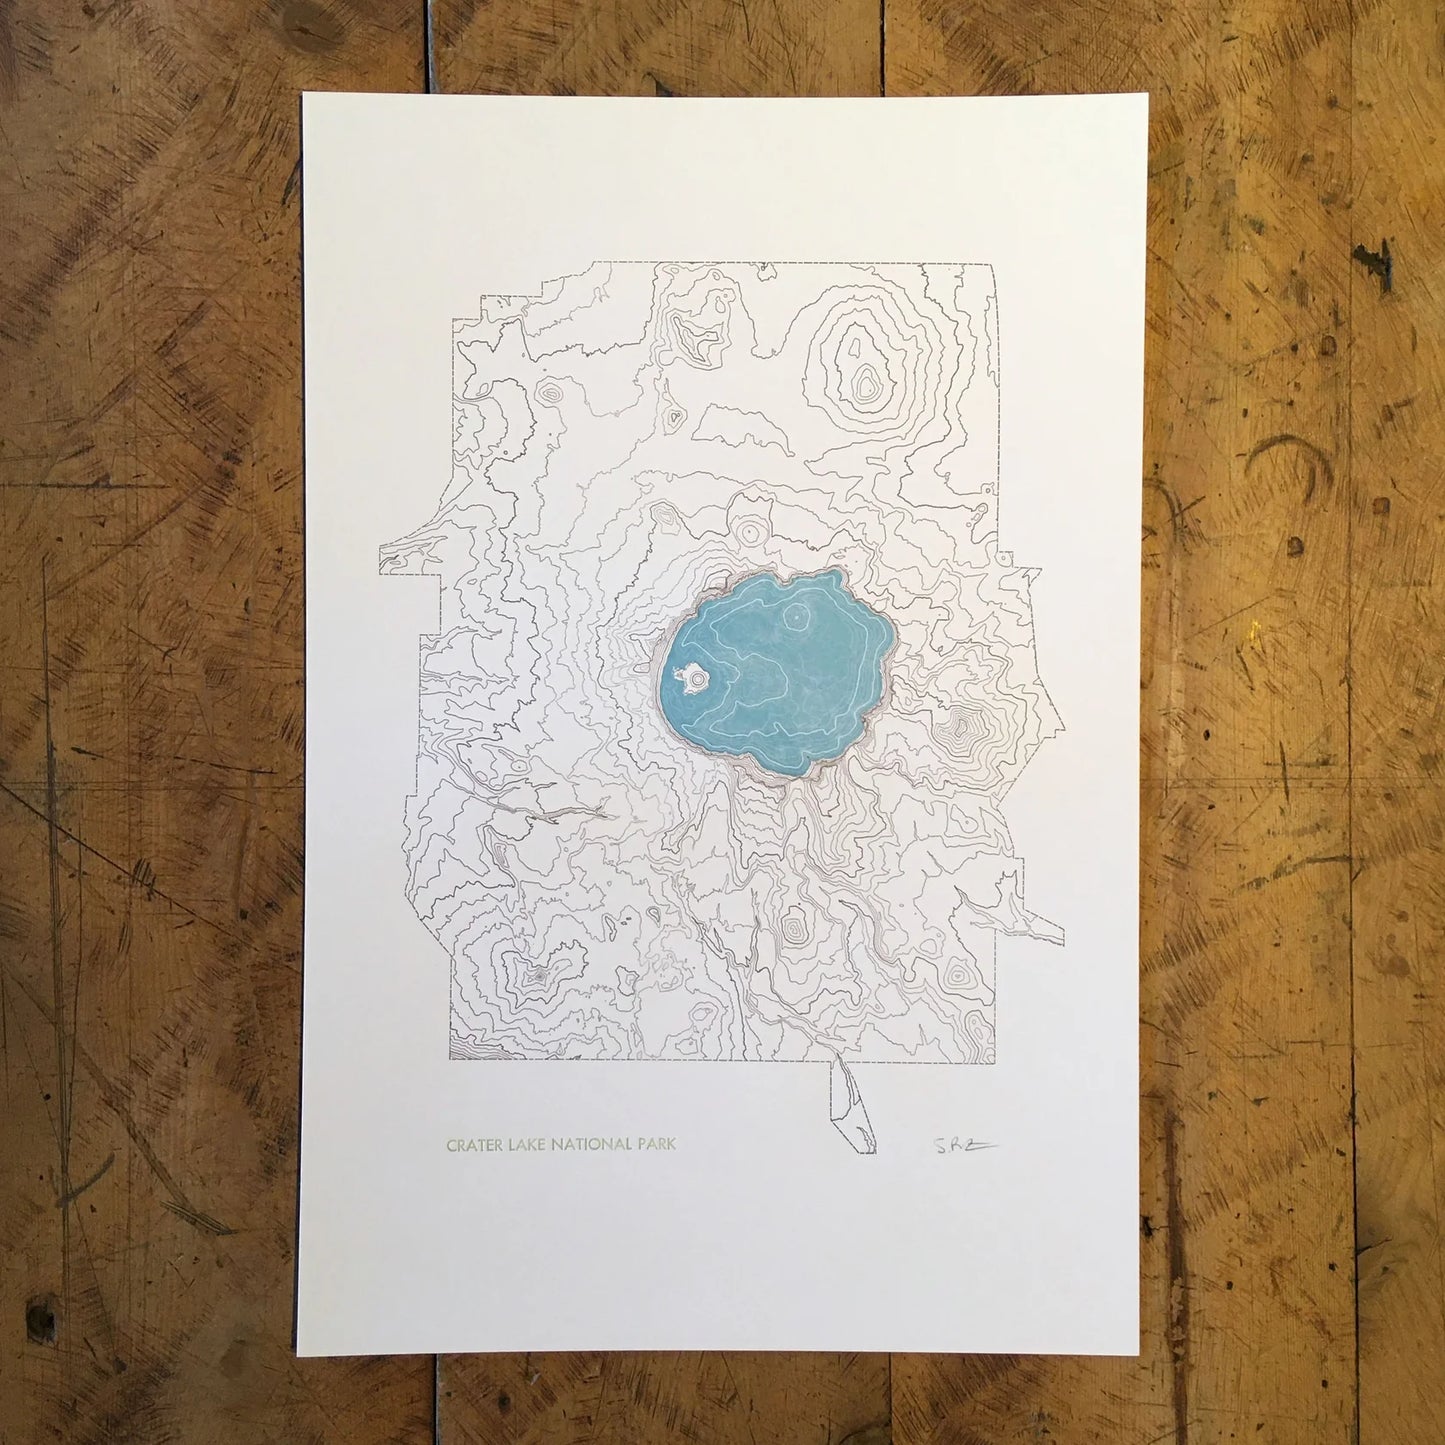 Crater Lake National Park Topographic Map Letterpress Print by Green Bird Press